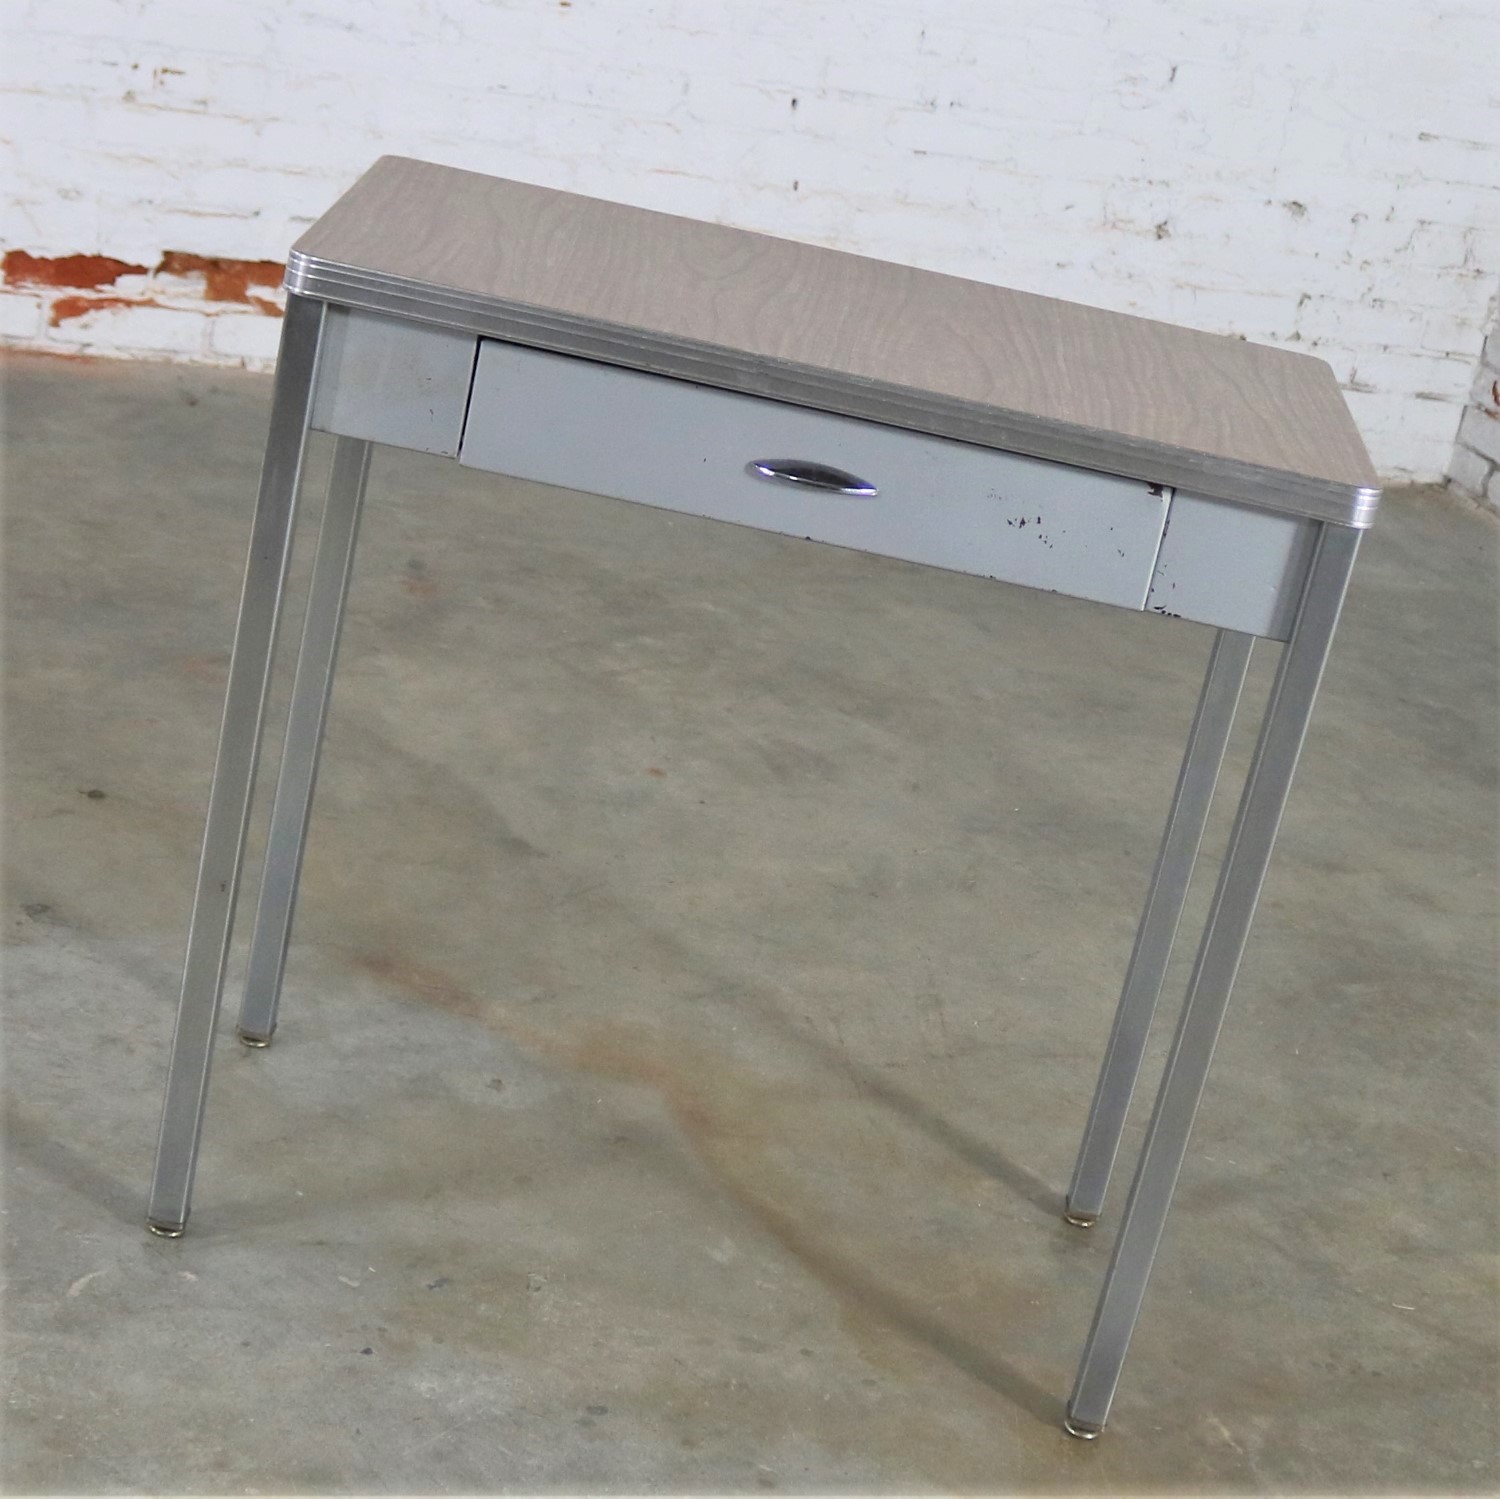 Art Deco Machine Age Streamline Moderne Table or Desk by Royal Metal Manufacturing